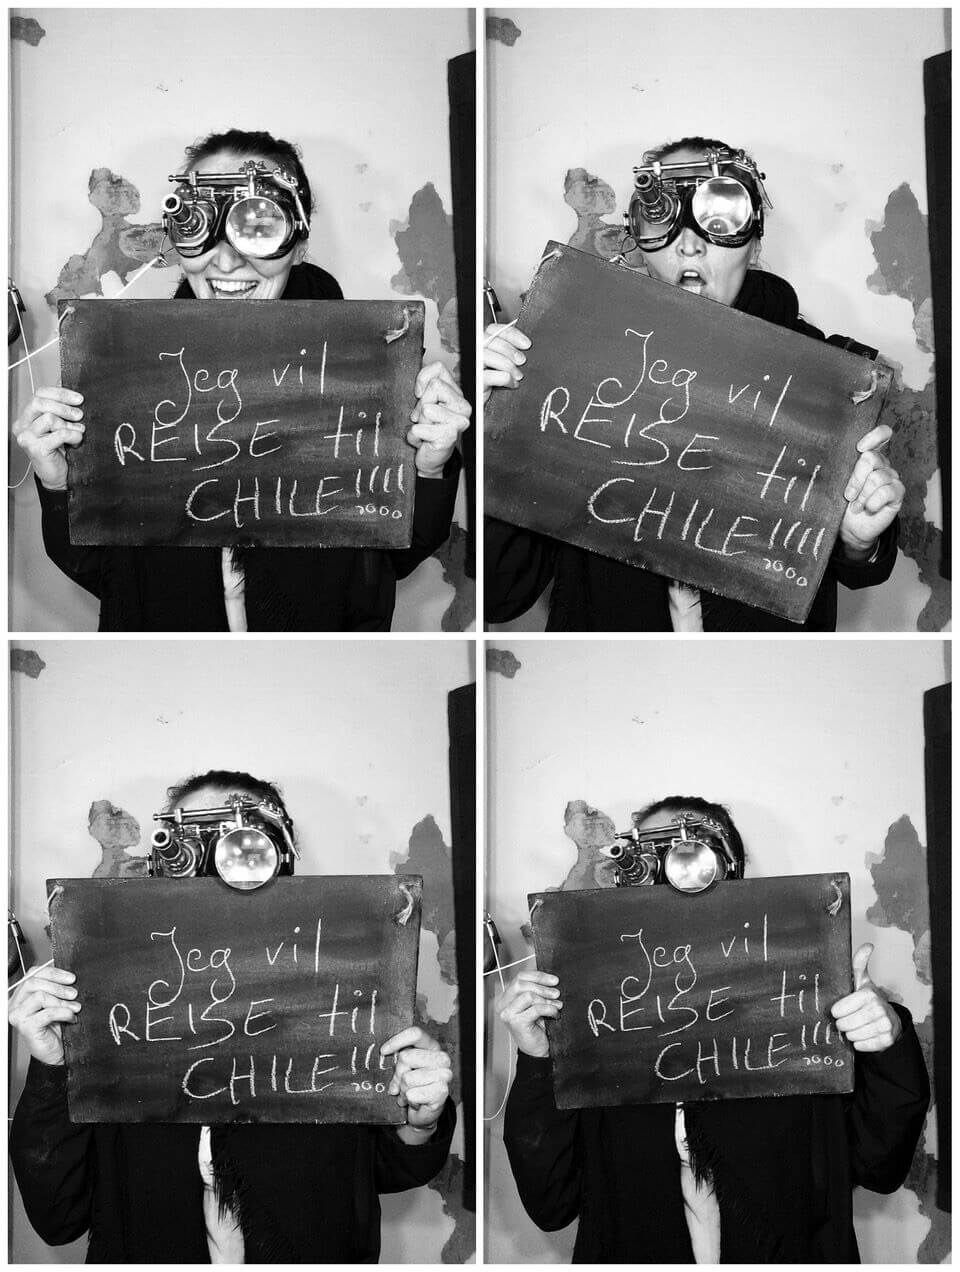 Four portraits of a person holding a sign that says Jeg vil reise til Chile! which means I want to go to Chile!